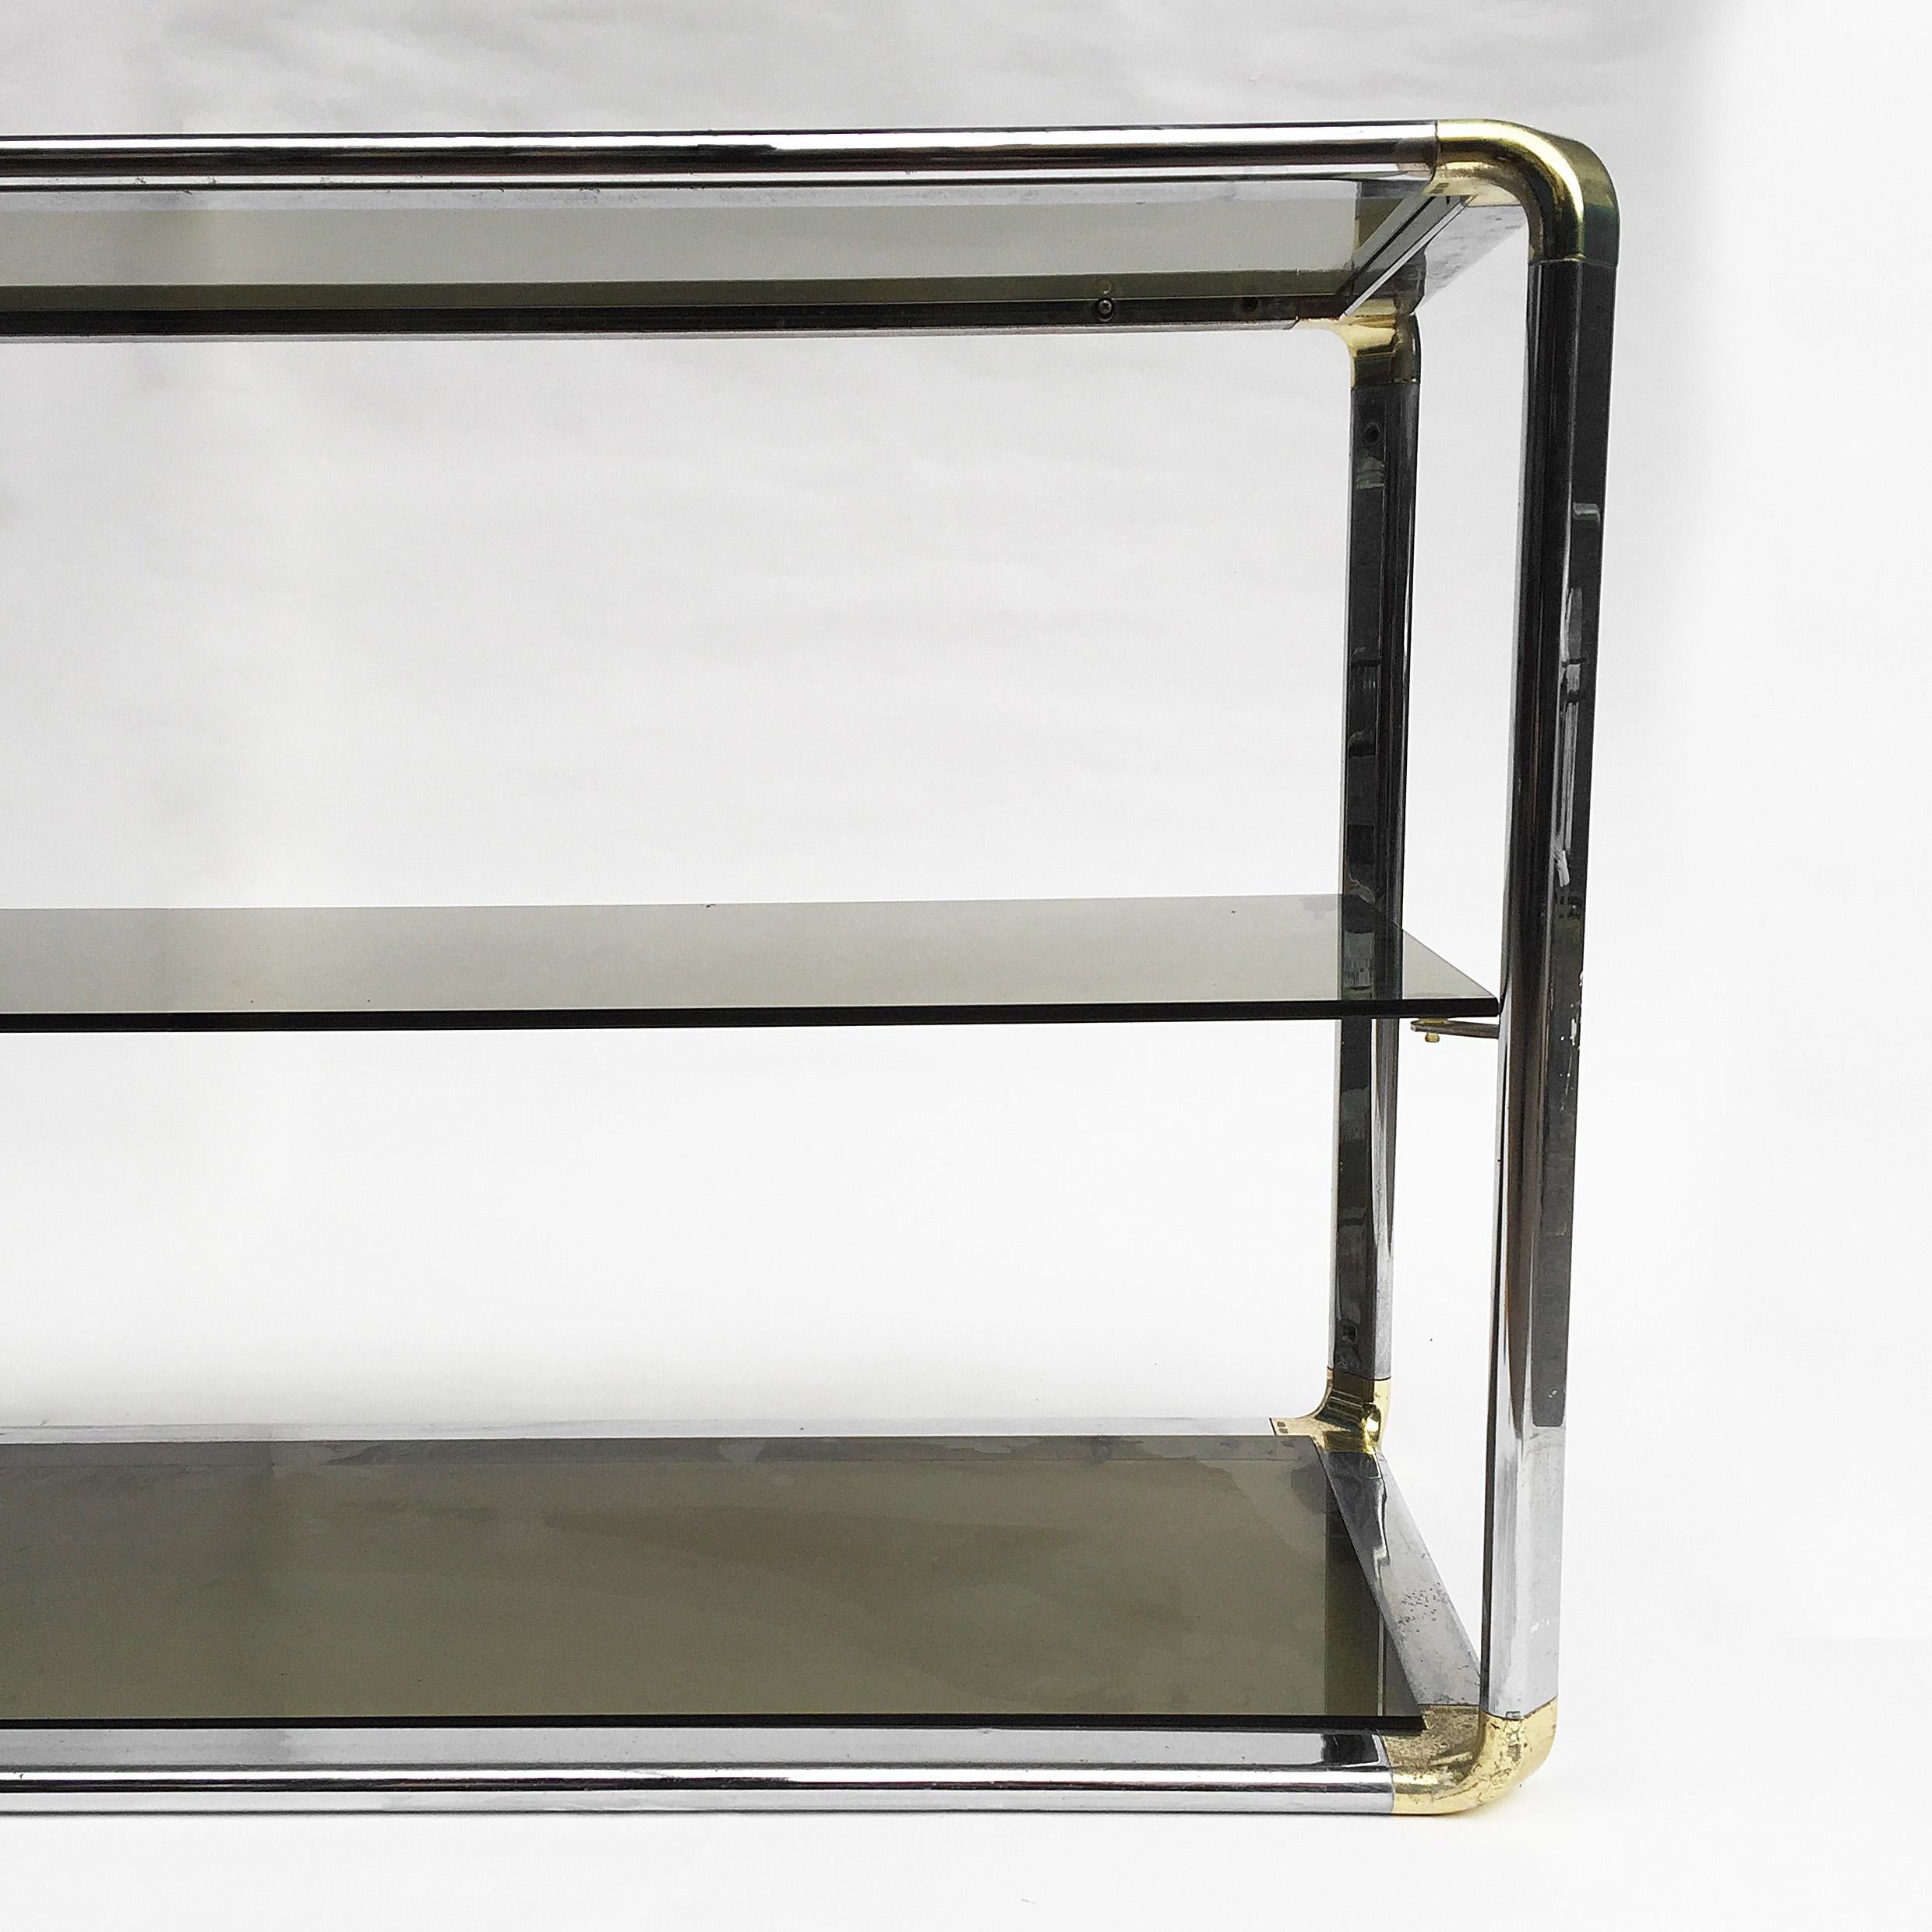 Chrome And Glass Sound System Display Shelving Etagere Unit Vintage Midcentury 2